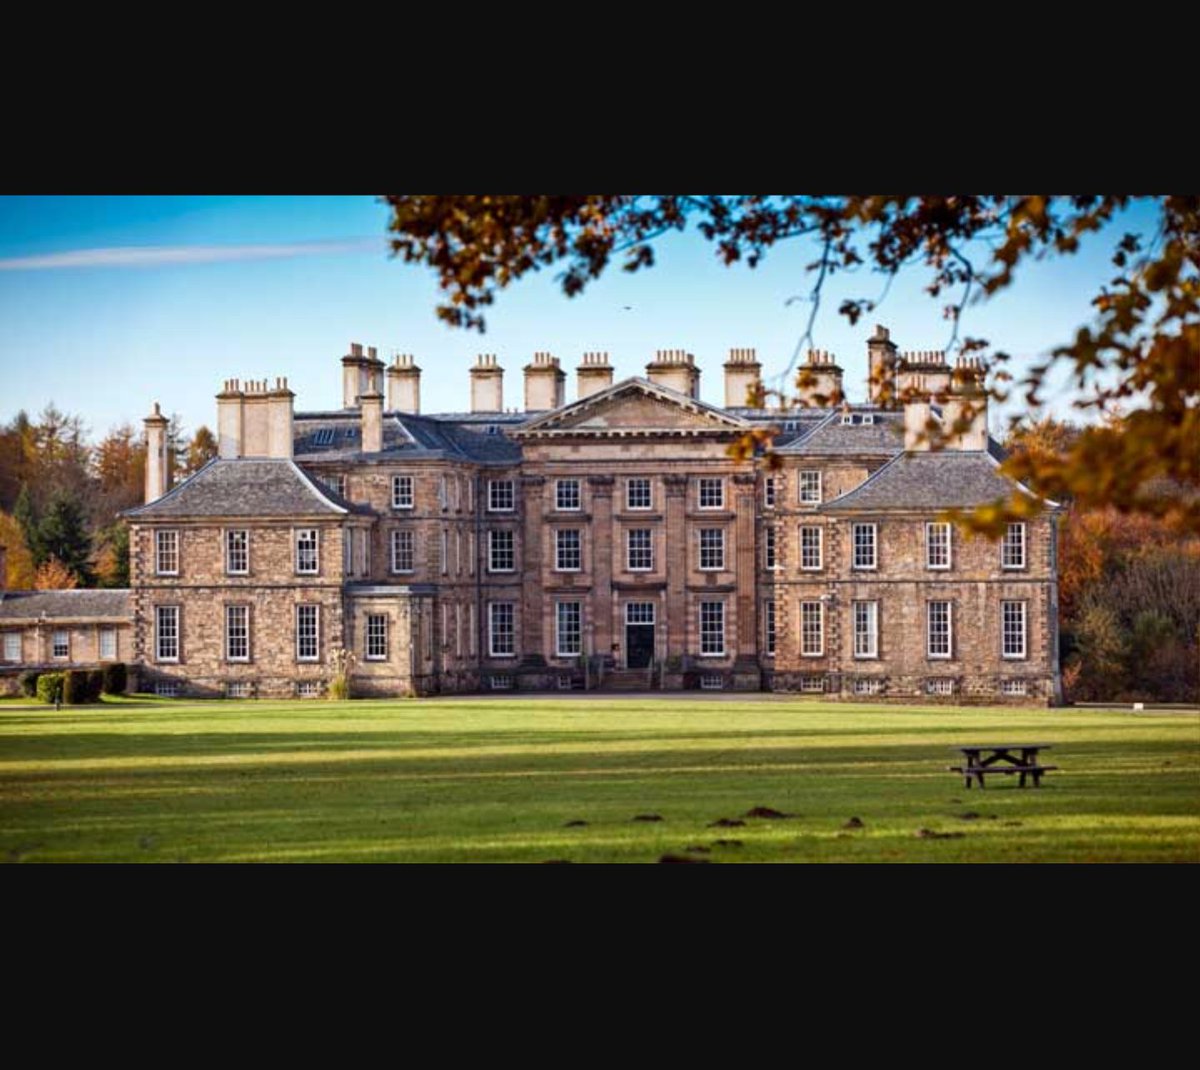 In 7 days I leave to call this beautiful palace, home for 3 months. #DalkeithPalace #Scotland